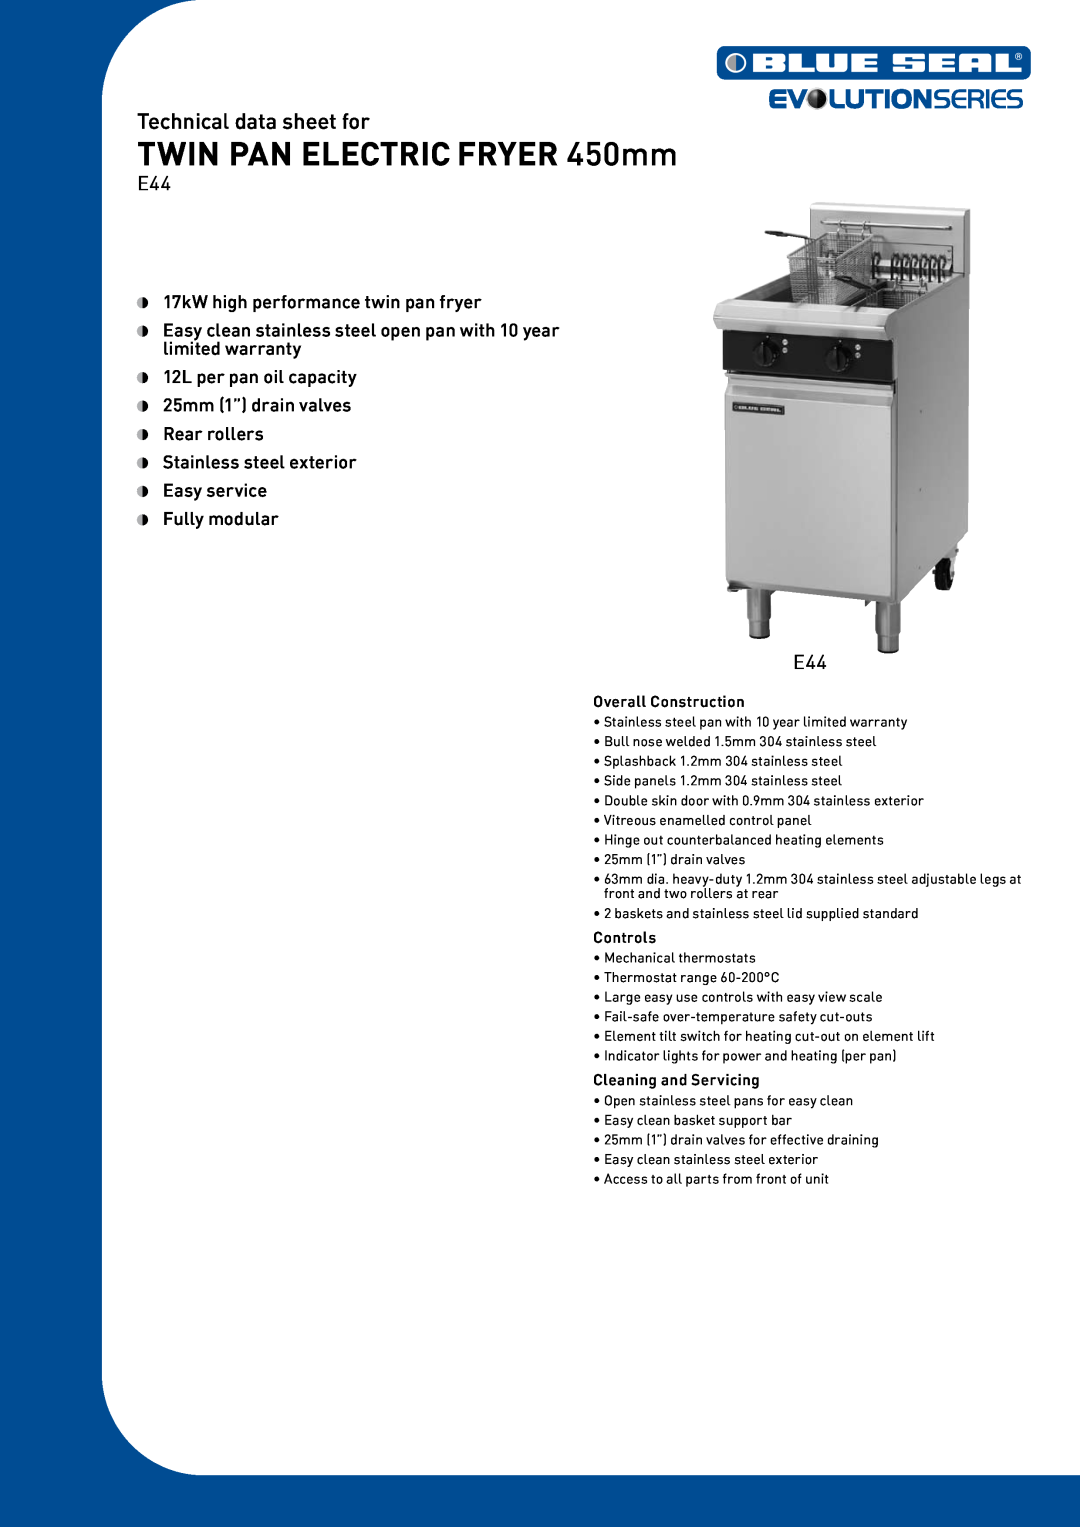 Moffat E44 warranty TWIN PAN ELECTRIC FRYER 450mm, Technical data sheet for, Overall Construction, Controls, Fully modular 